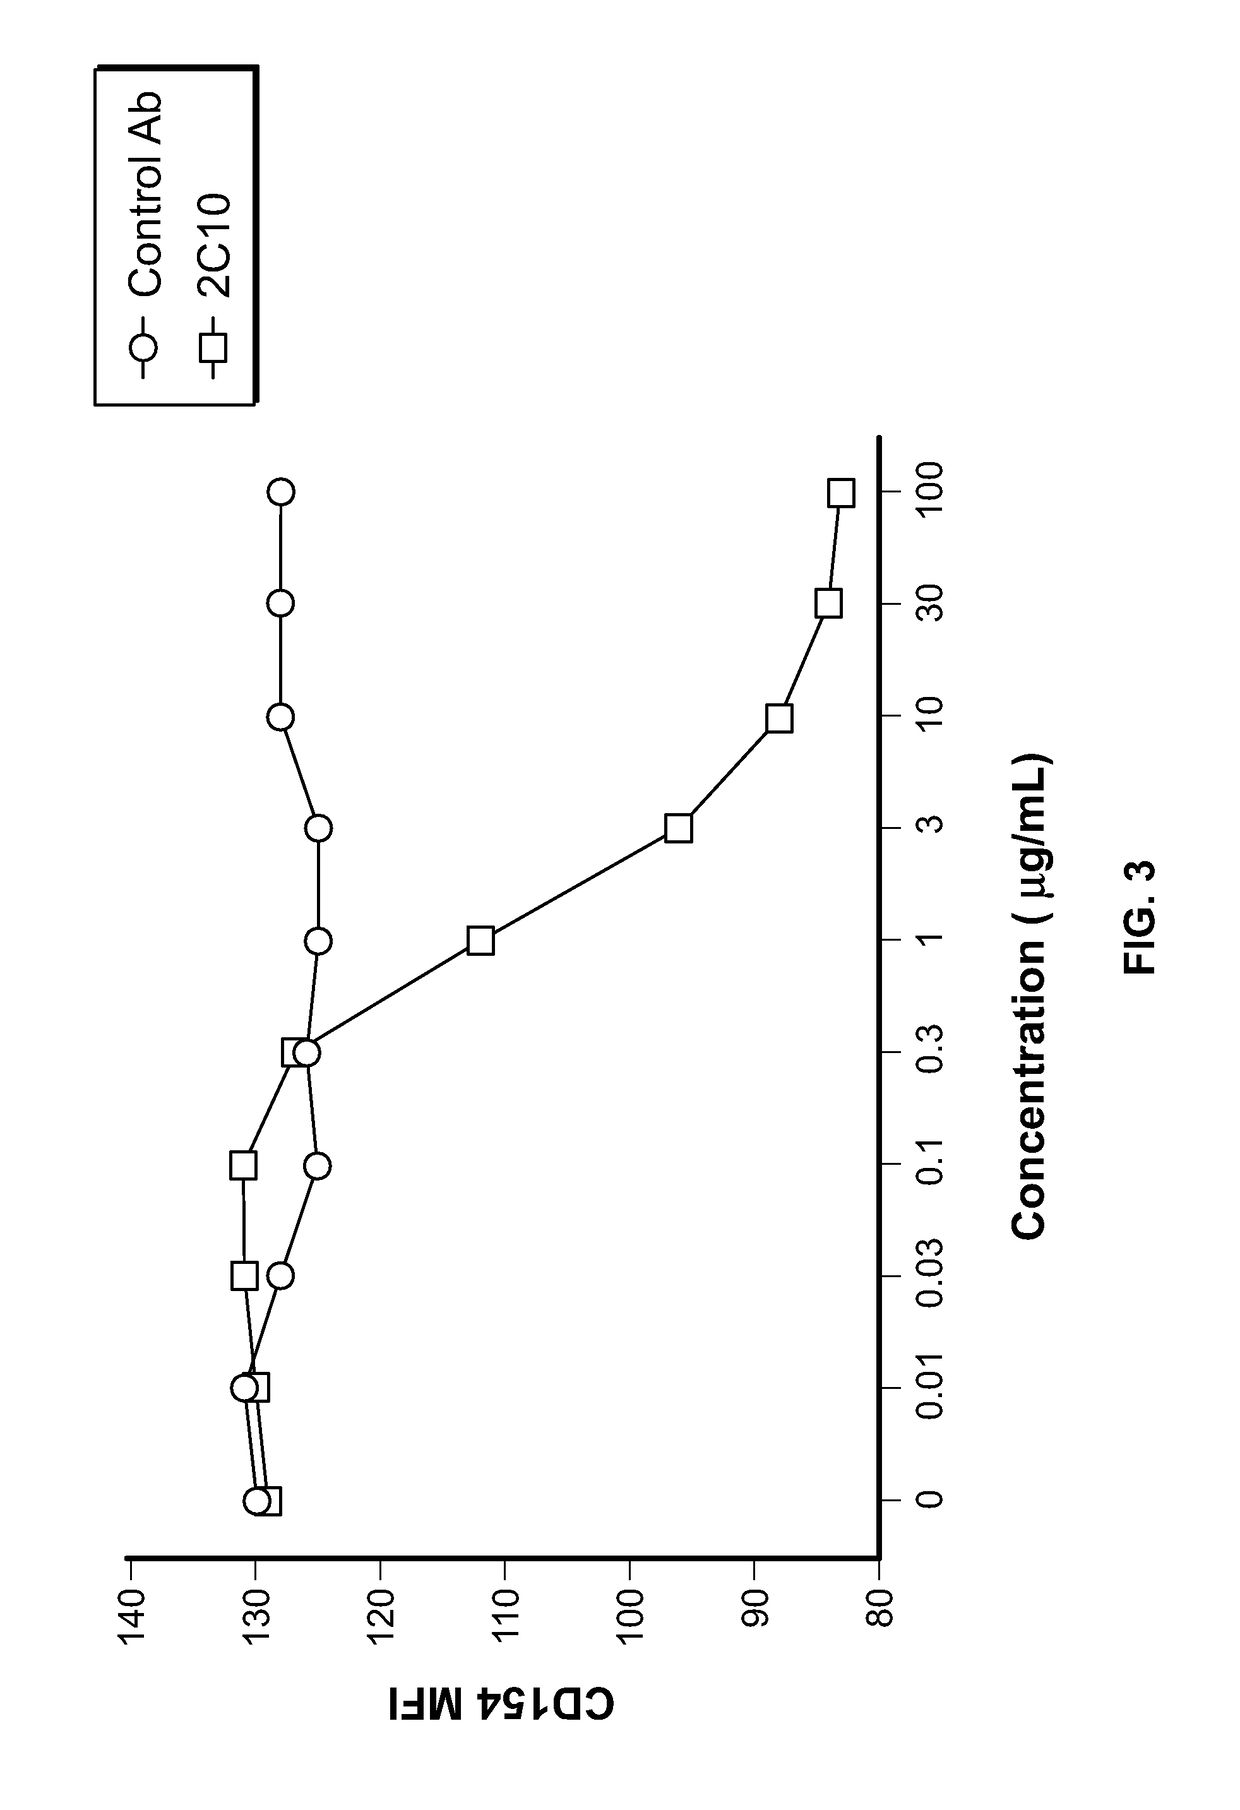 Humanized anti-CD40 antibodies and methods of administering thereof